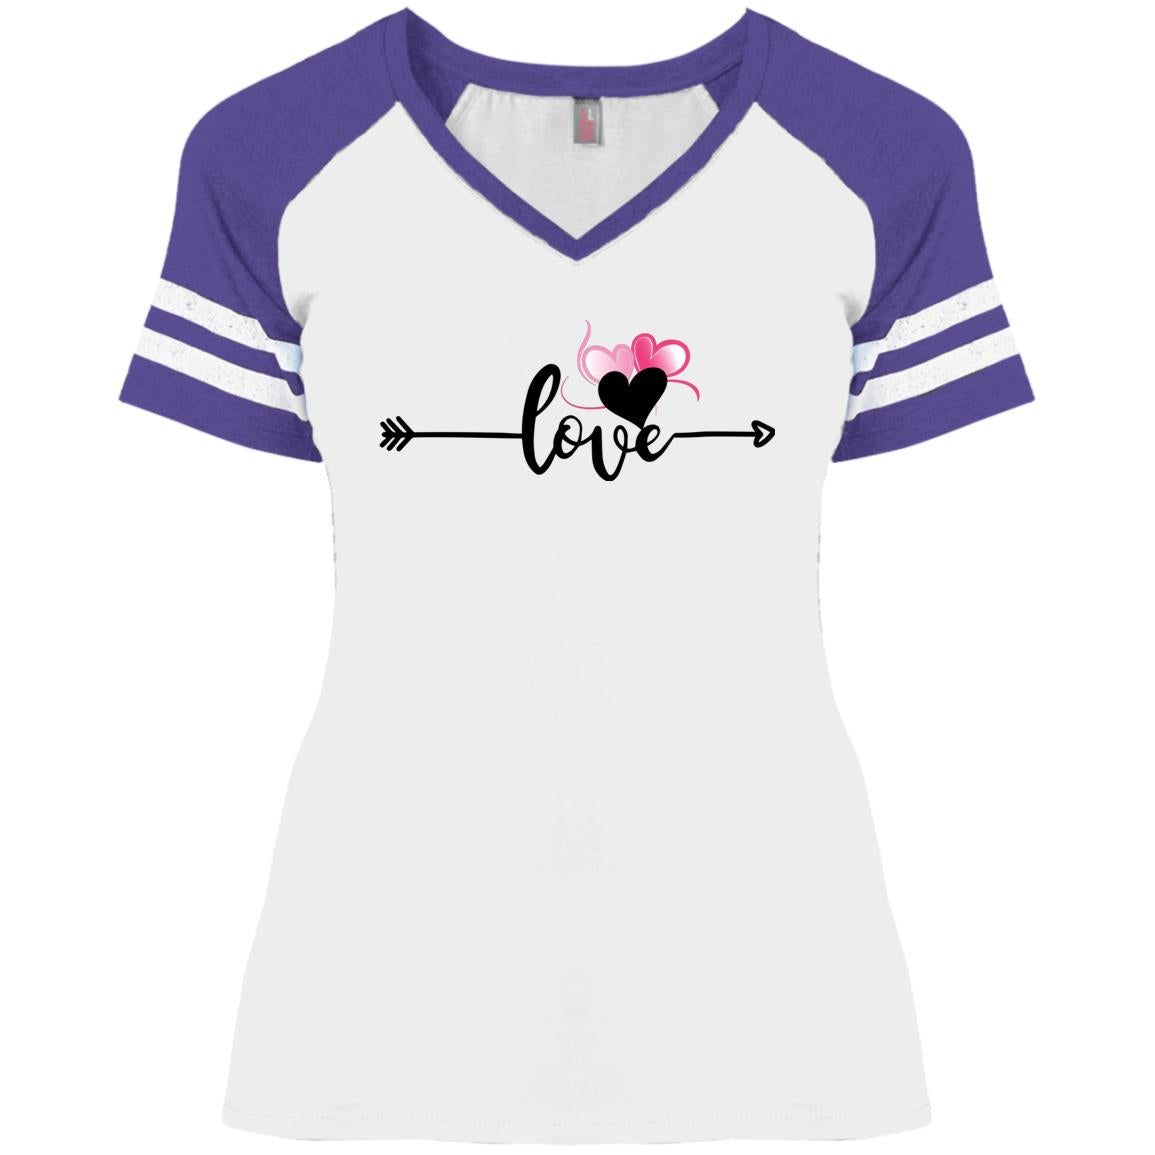 White Heather Purple - Love in Motion Ladies' Game V-Neck T-Shirt - Womens T-Shirts at TFC&H Co.